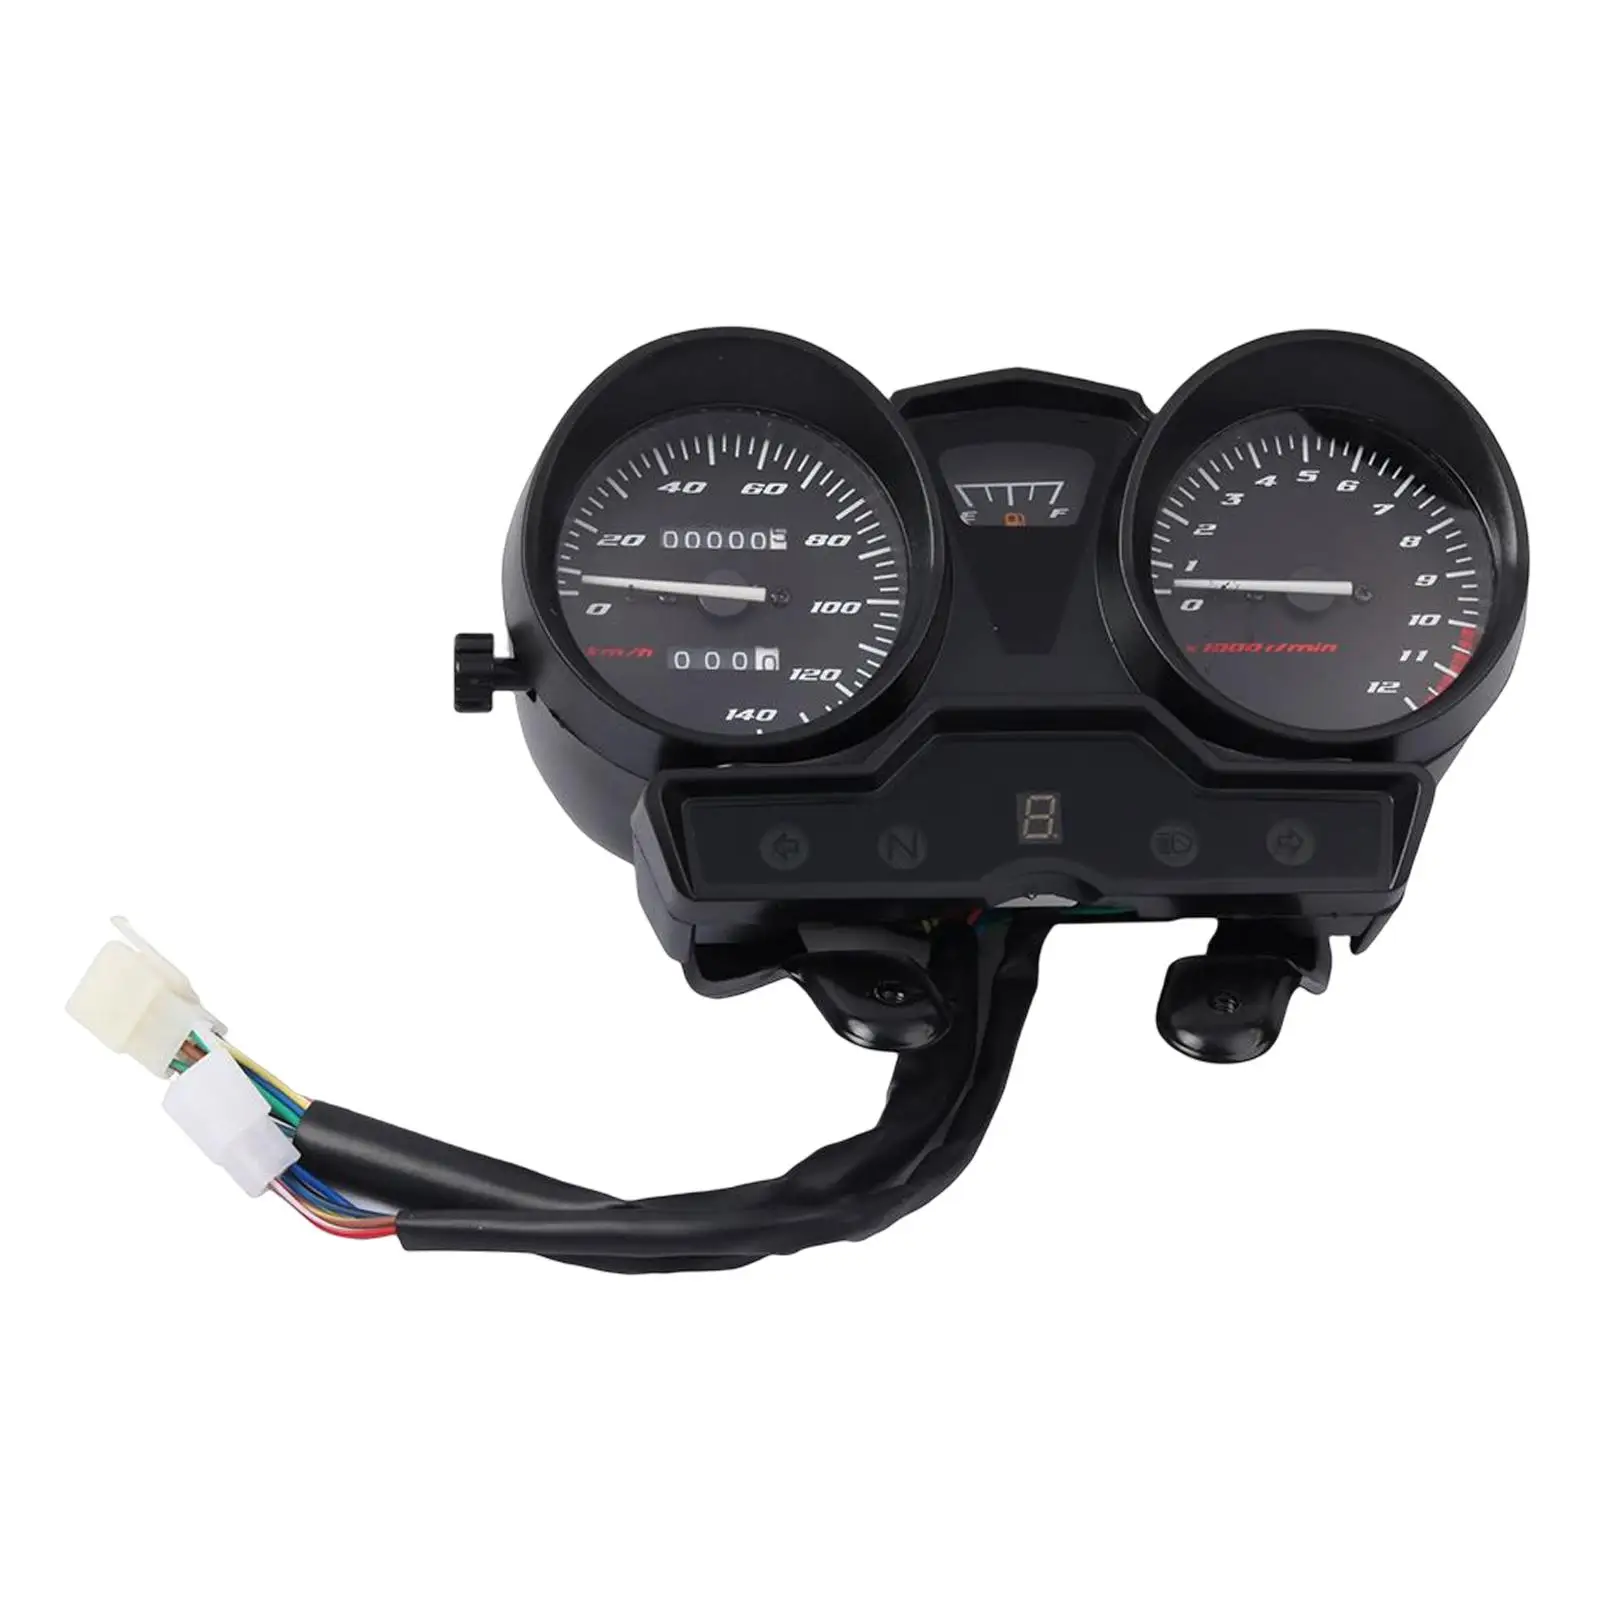 LED Digital Dashboard Motorcycle RPM Meter Meter Accessories Spare Parts